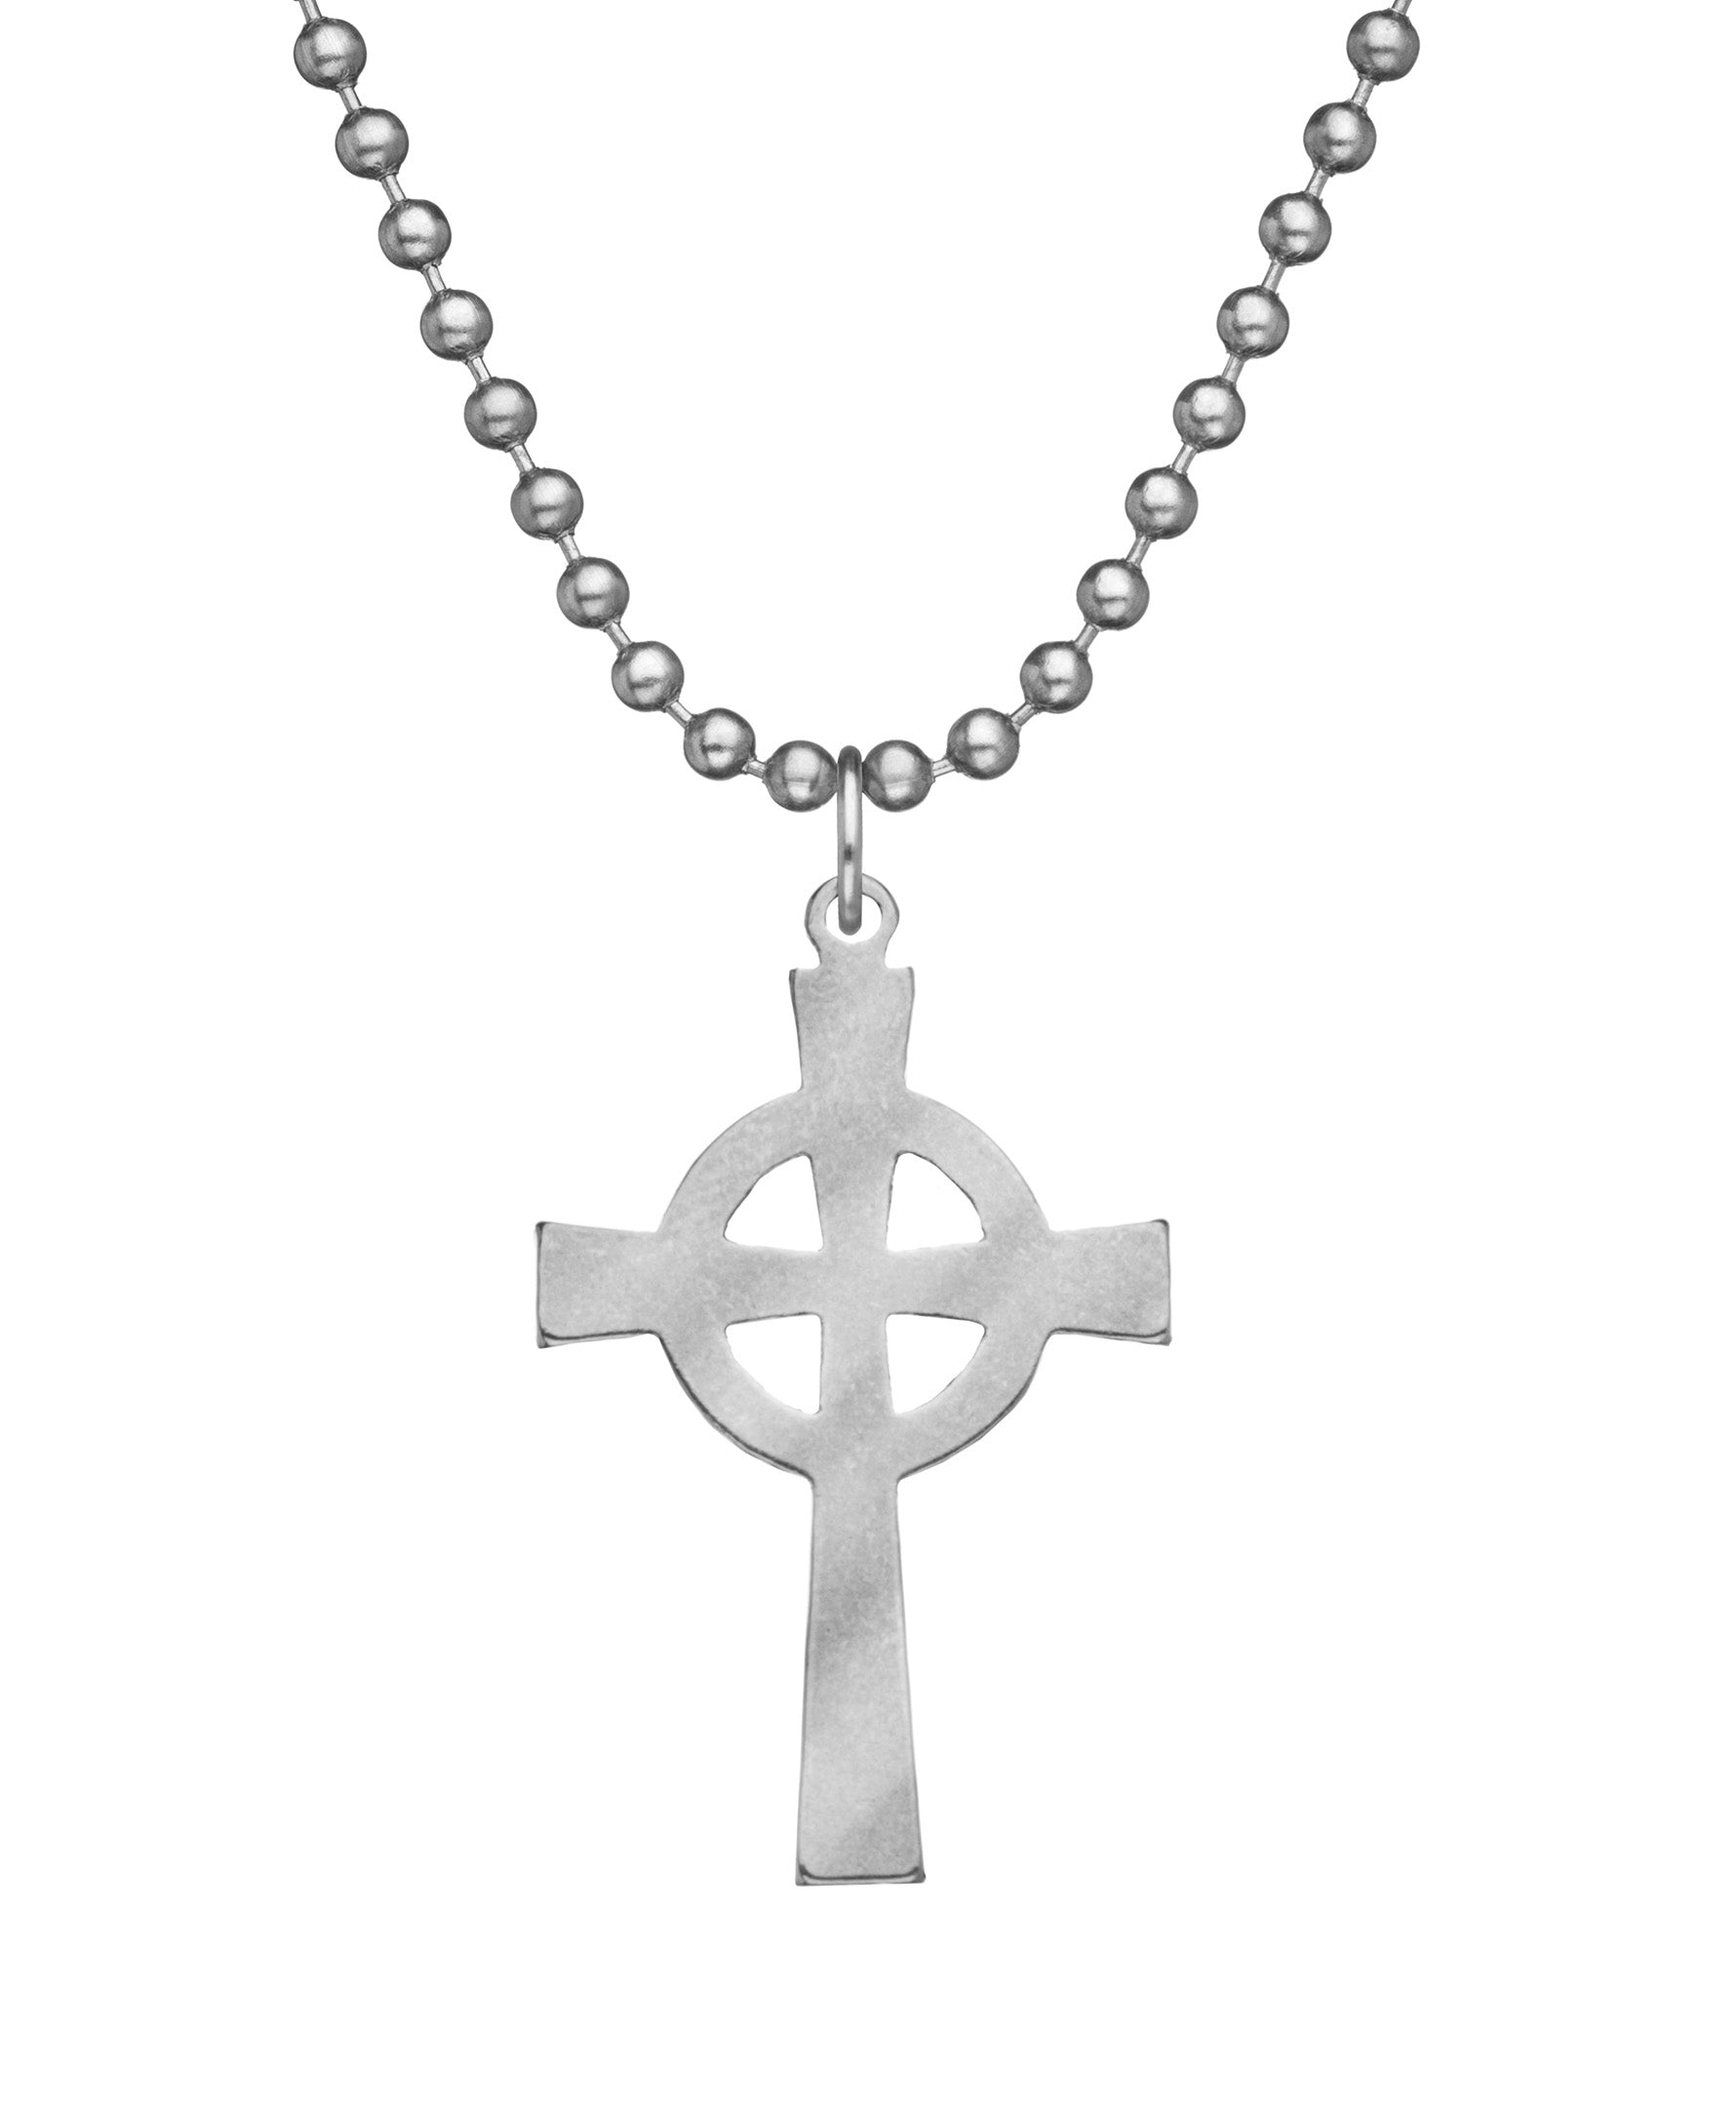 Genuine U.S. Military Issue Celtic Cross Necklace with Dog Tag Chain